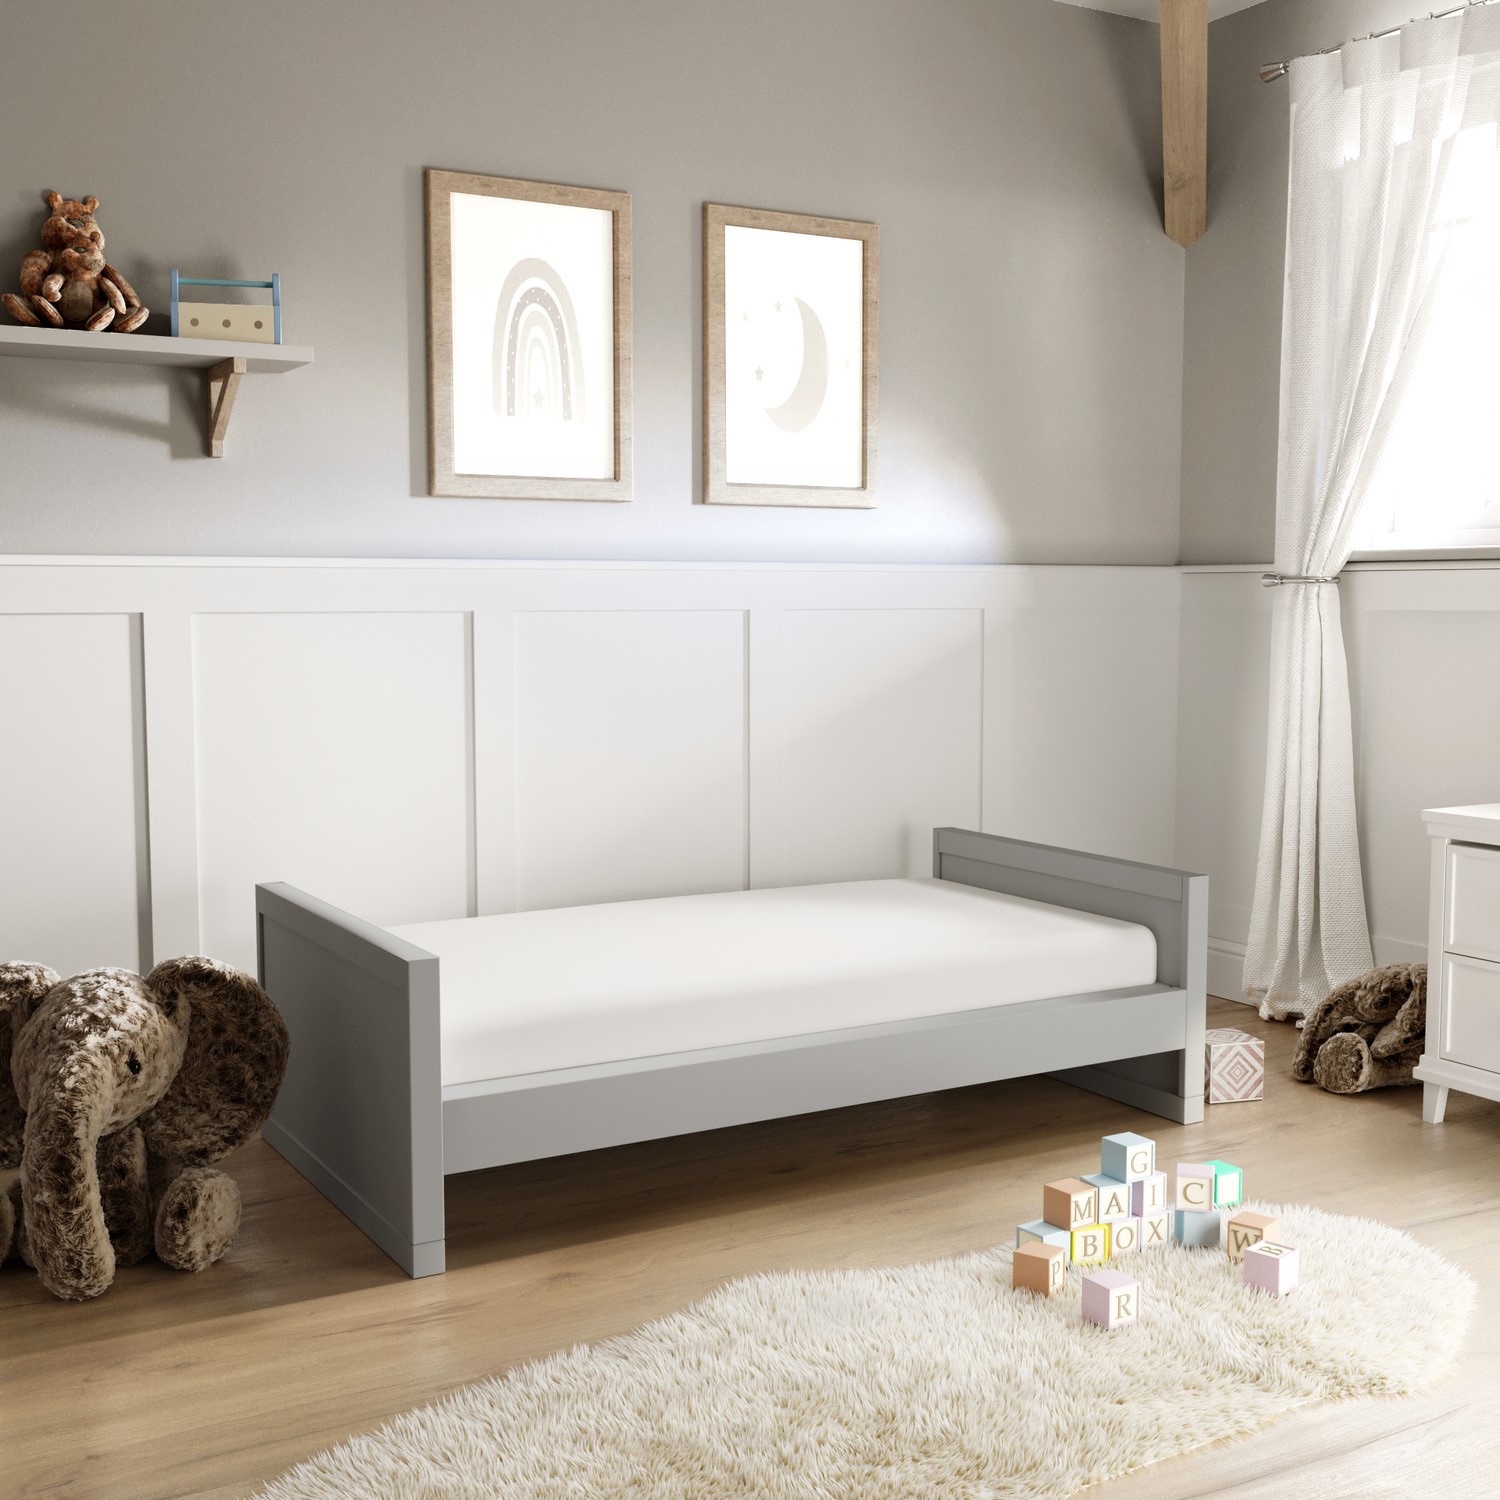 Read more about Light grey pine wood convertible 2-in-1 cot bed mason